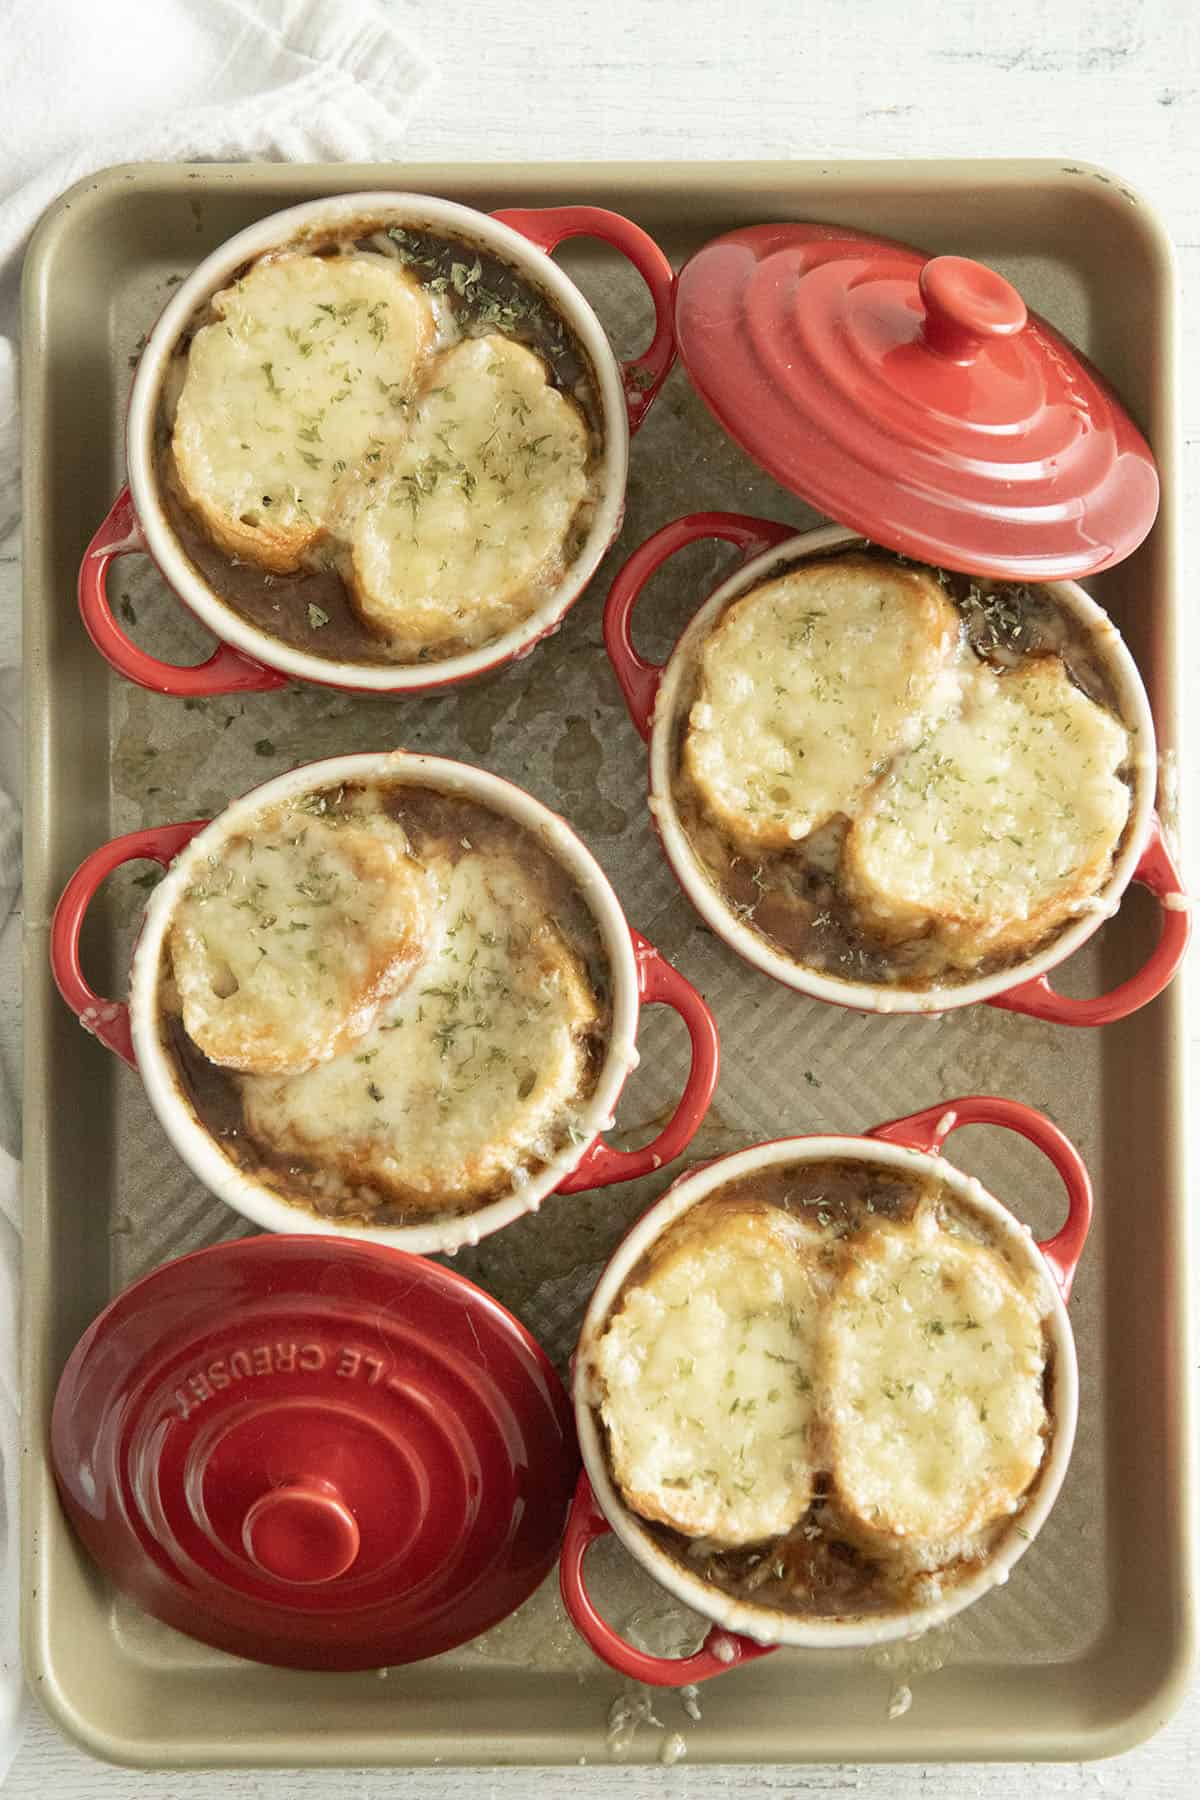 bowls of french onion soup